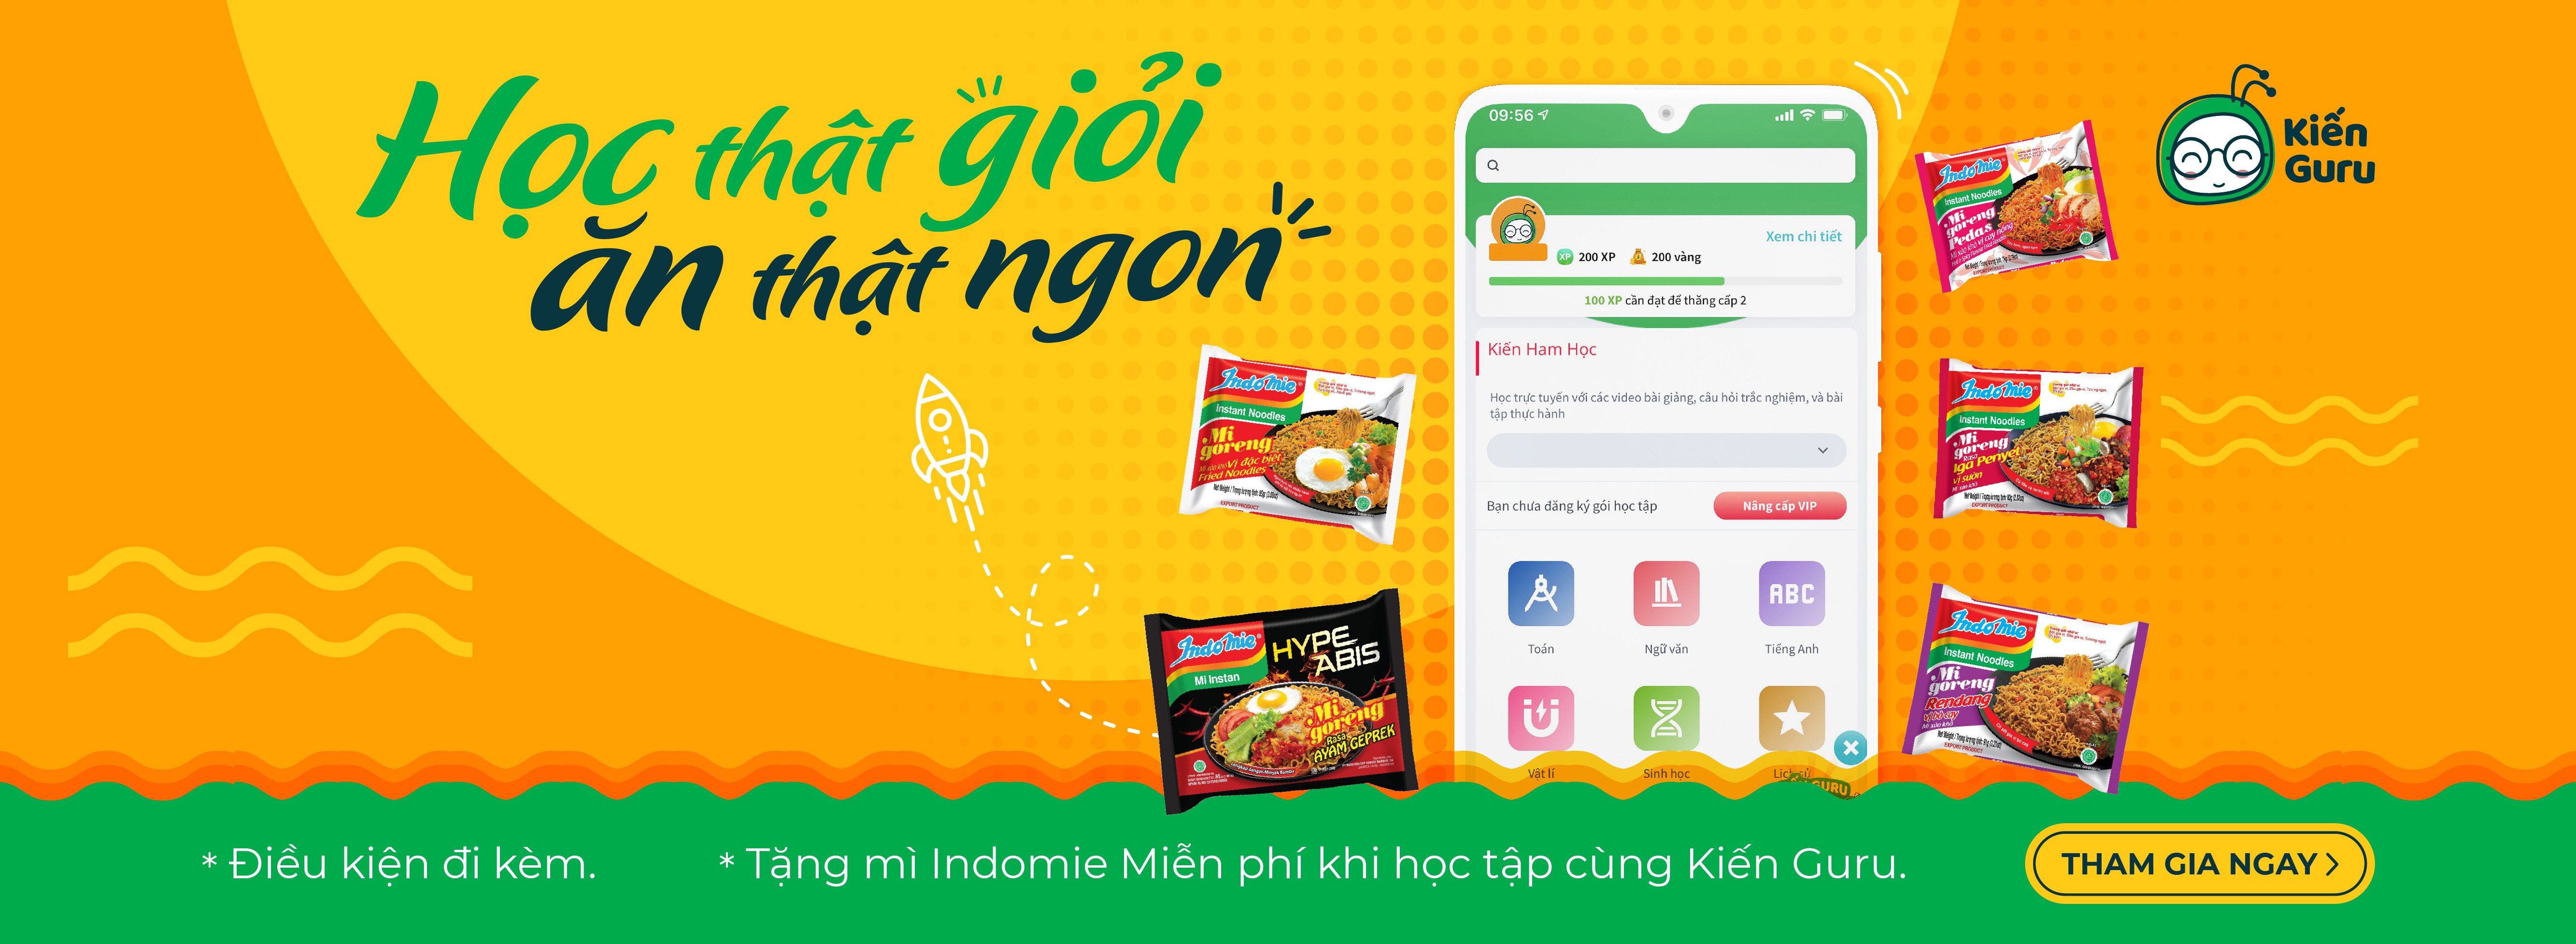 kgr-indomie-hoc-that-gioi-an-that-ngon-1